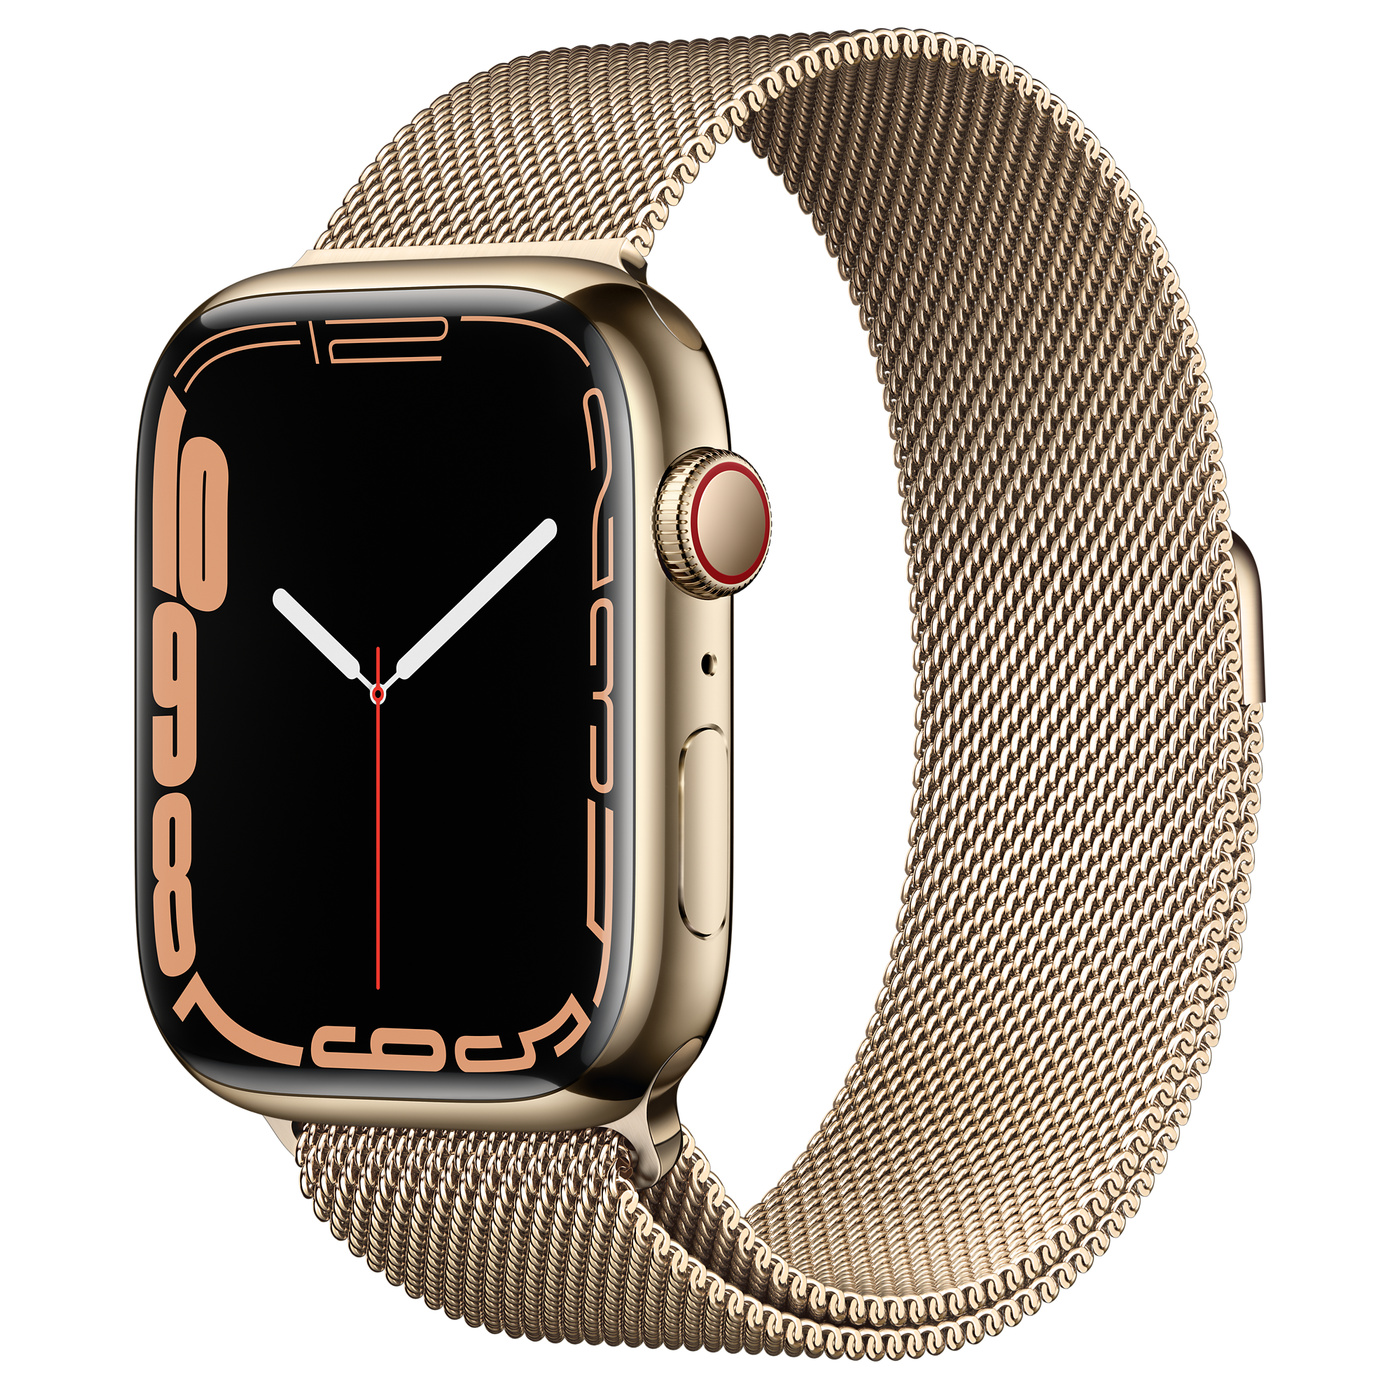 Apple Watch Series 7 45MM Gold Stainless Steel Case with Milanese Loop